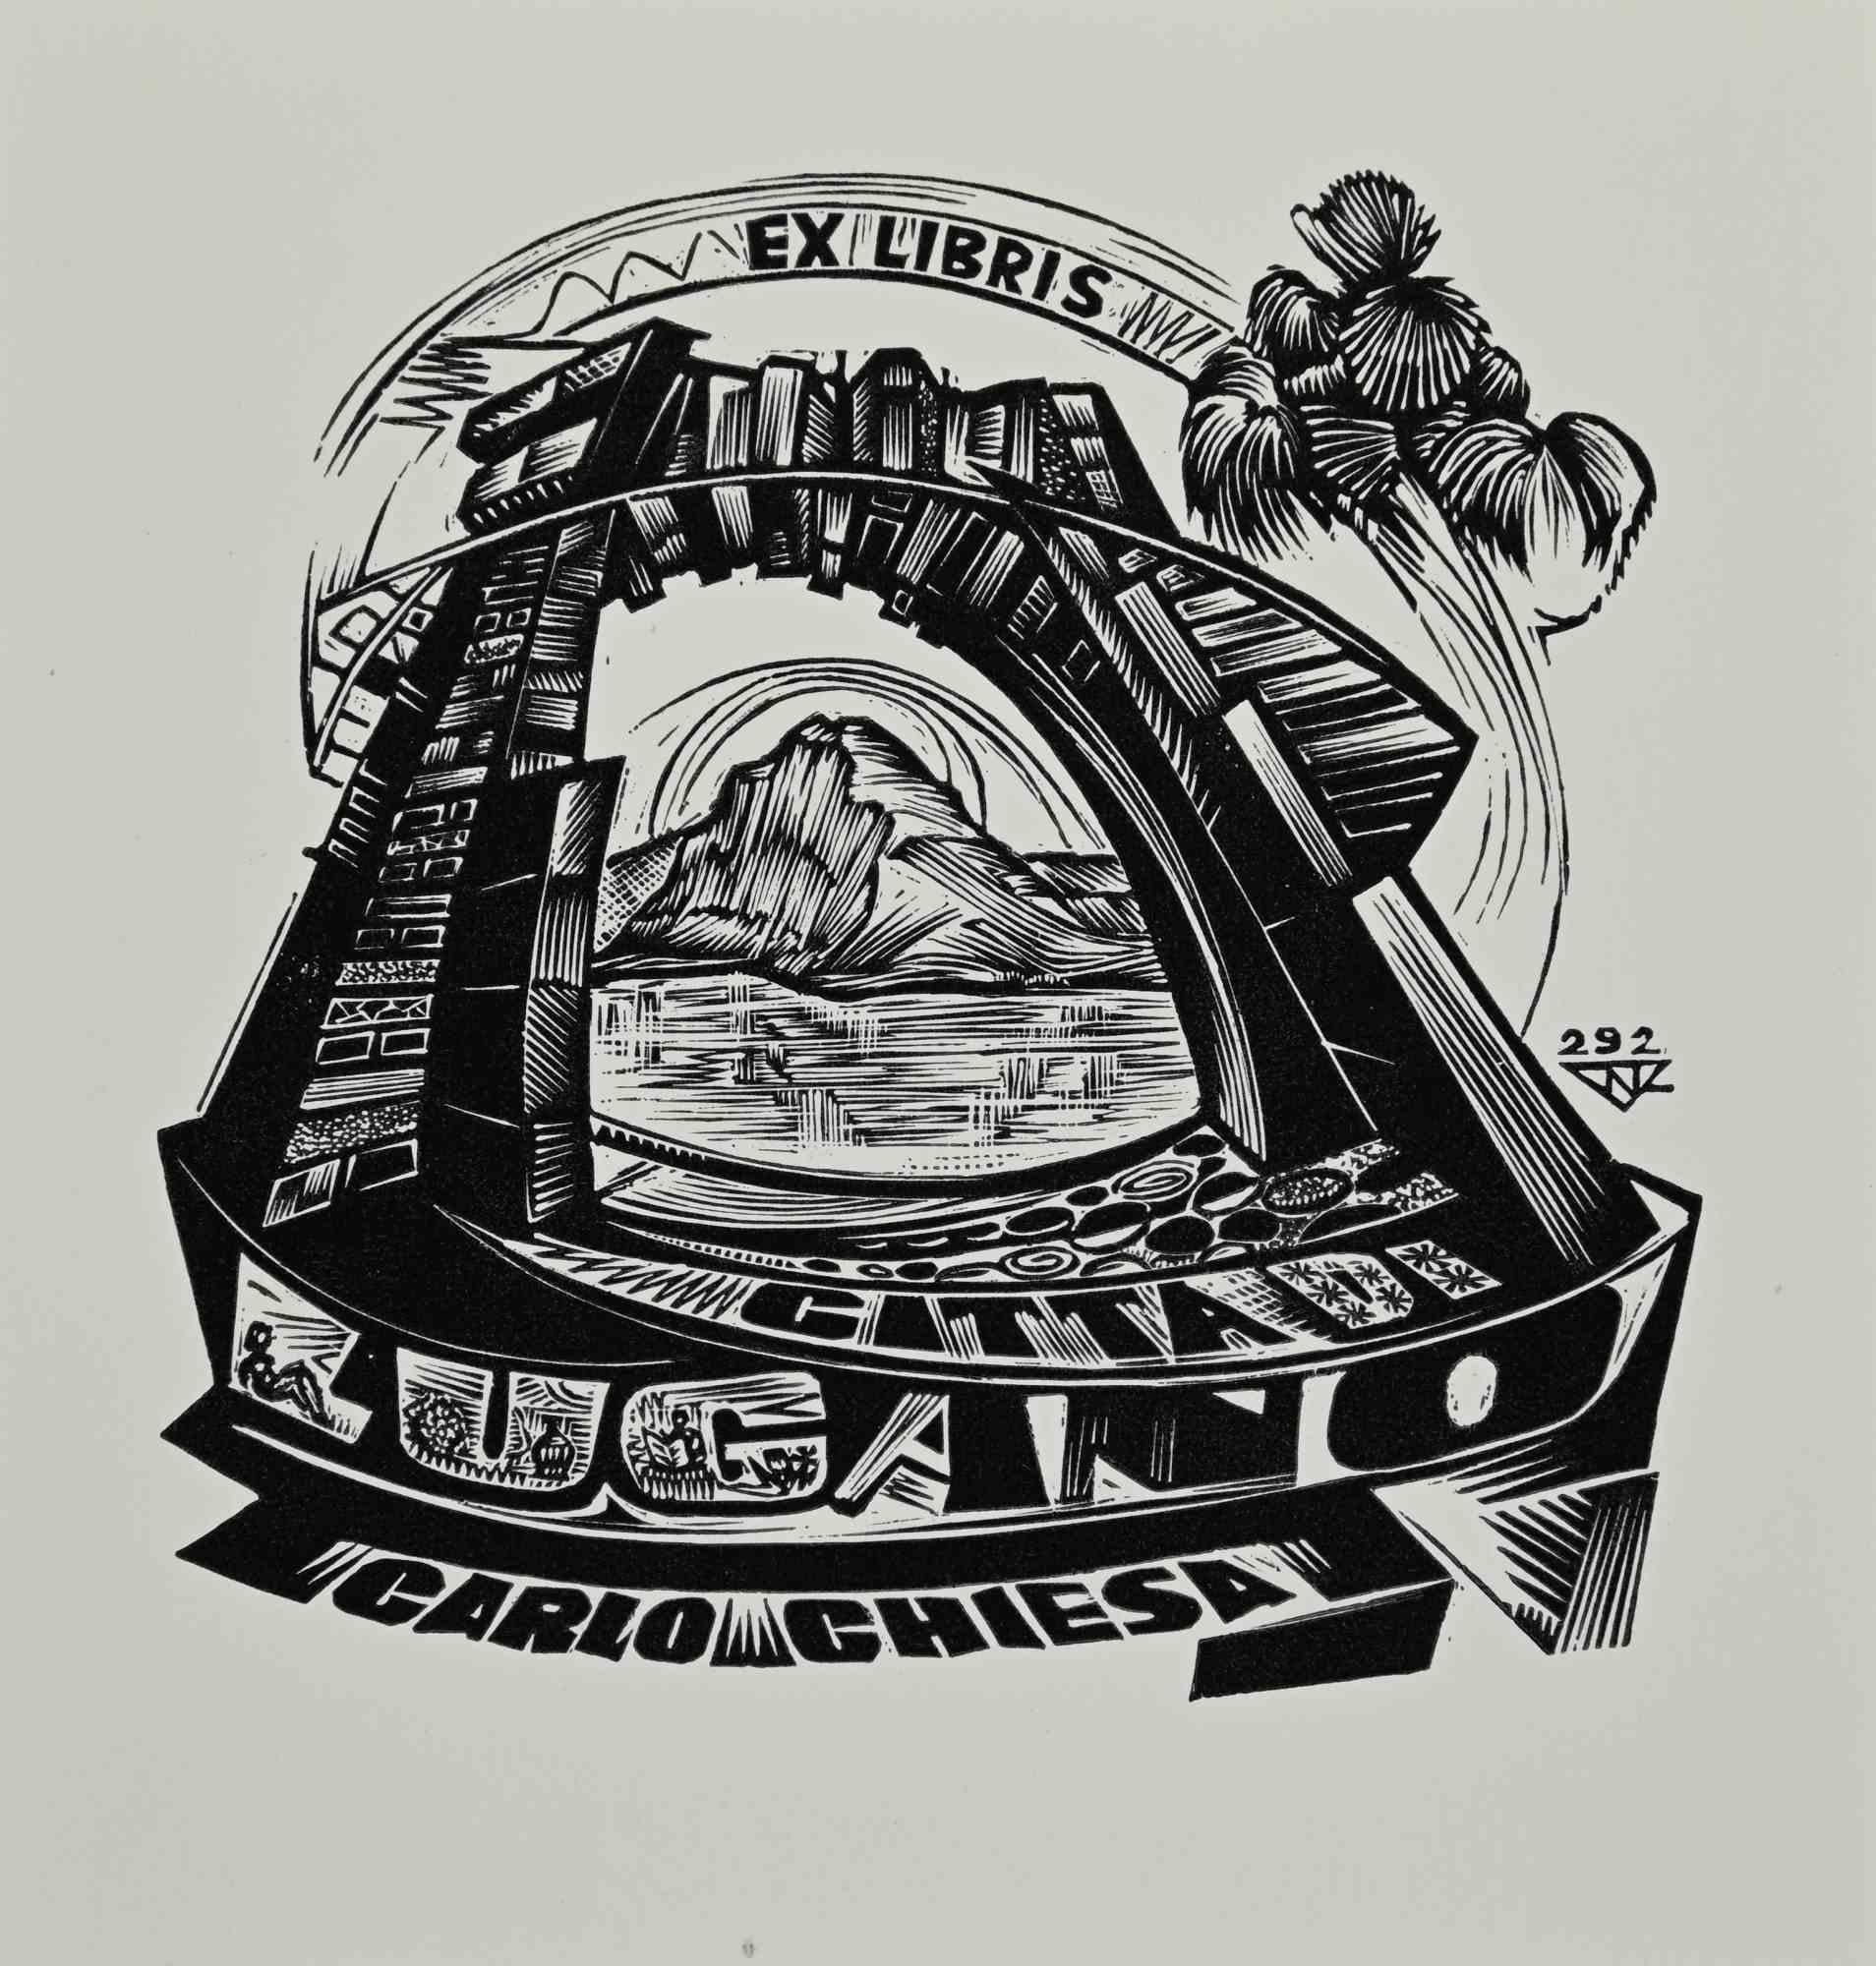 Ex Libris - Città di Lugano is an Artwork realized in 1980s, by the Artist L. Nagy.

Woodcut print on paper. Monogrammed on plate on the right corner.

Good conditions.

The artist wants to define a well-balanced composition, through preciseness and